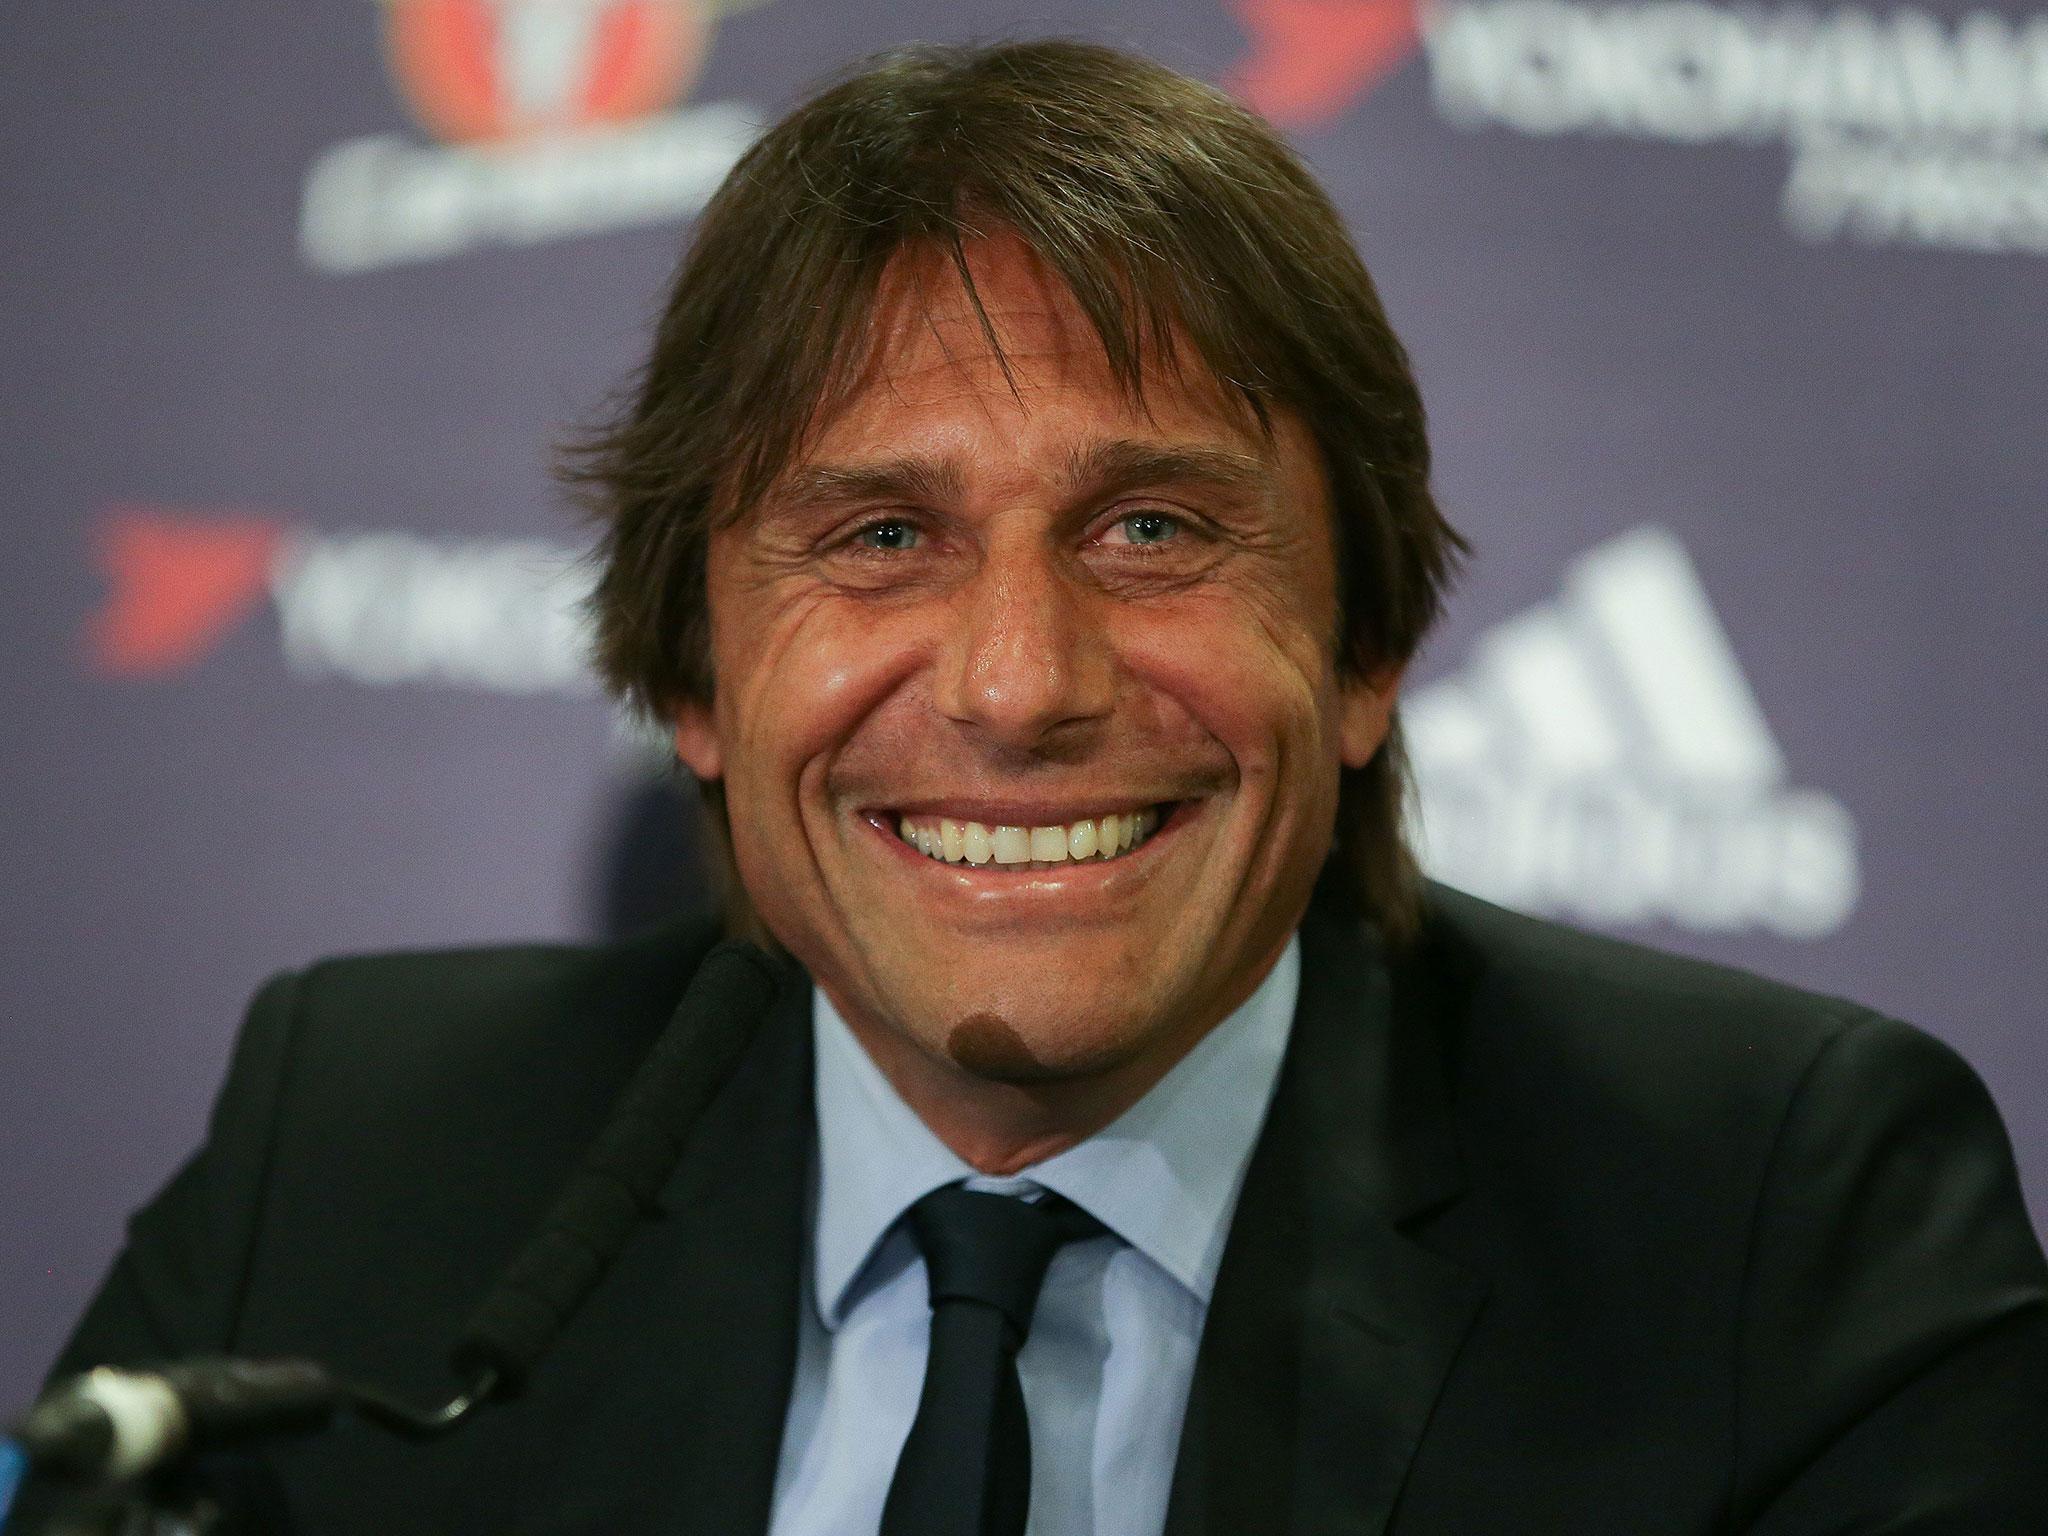 There seems to be real substance to what we’re seeing from Conte